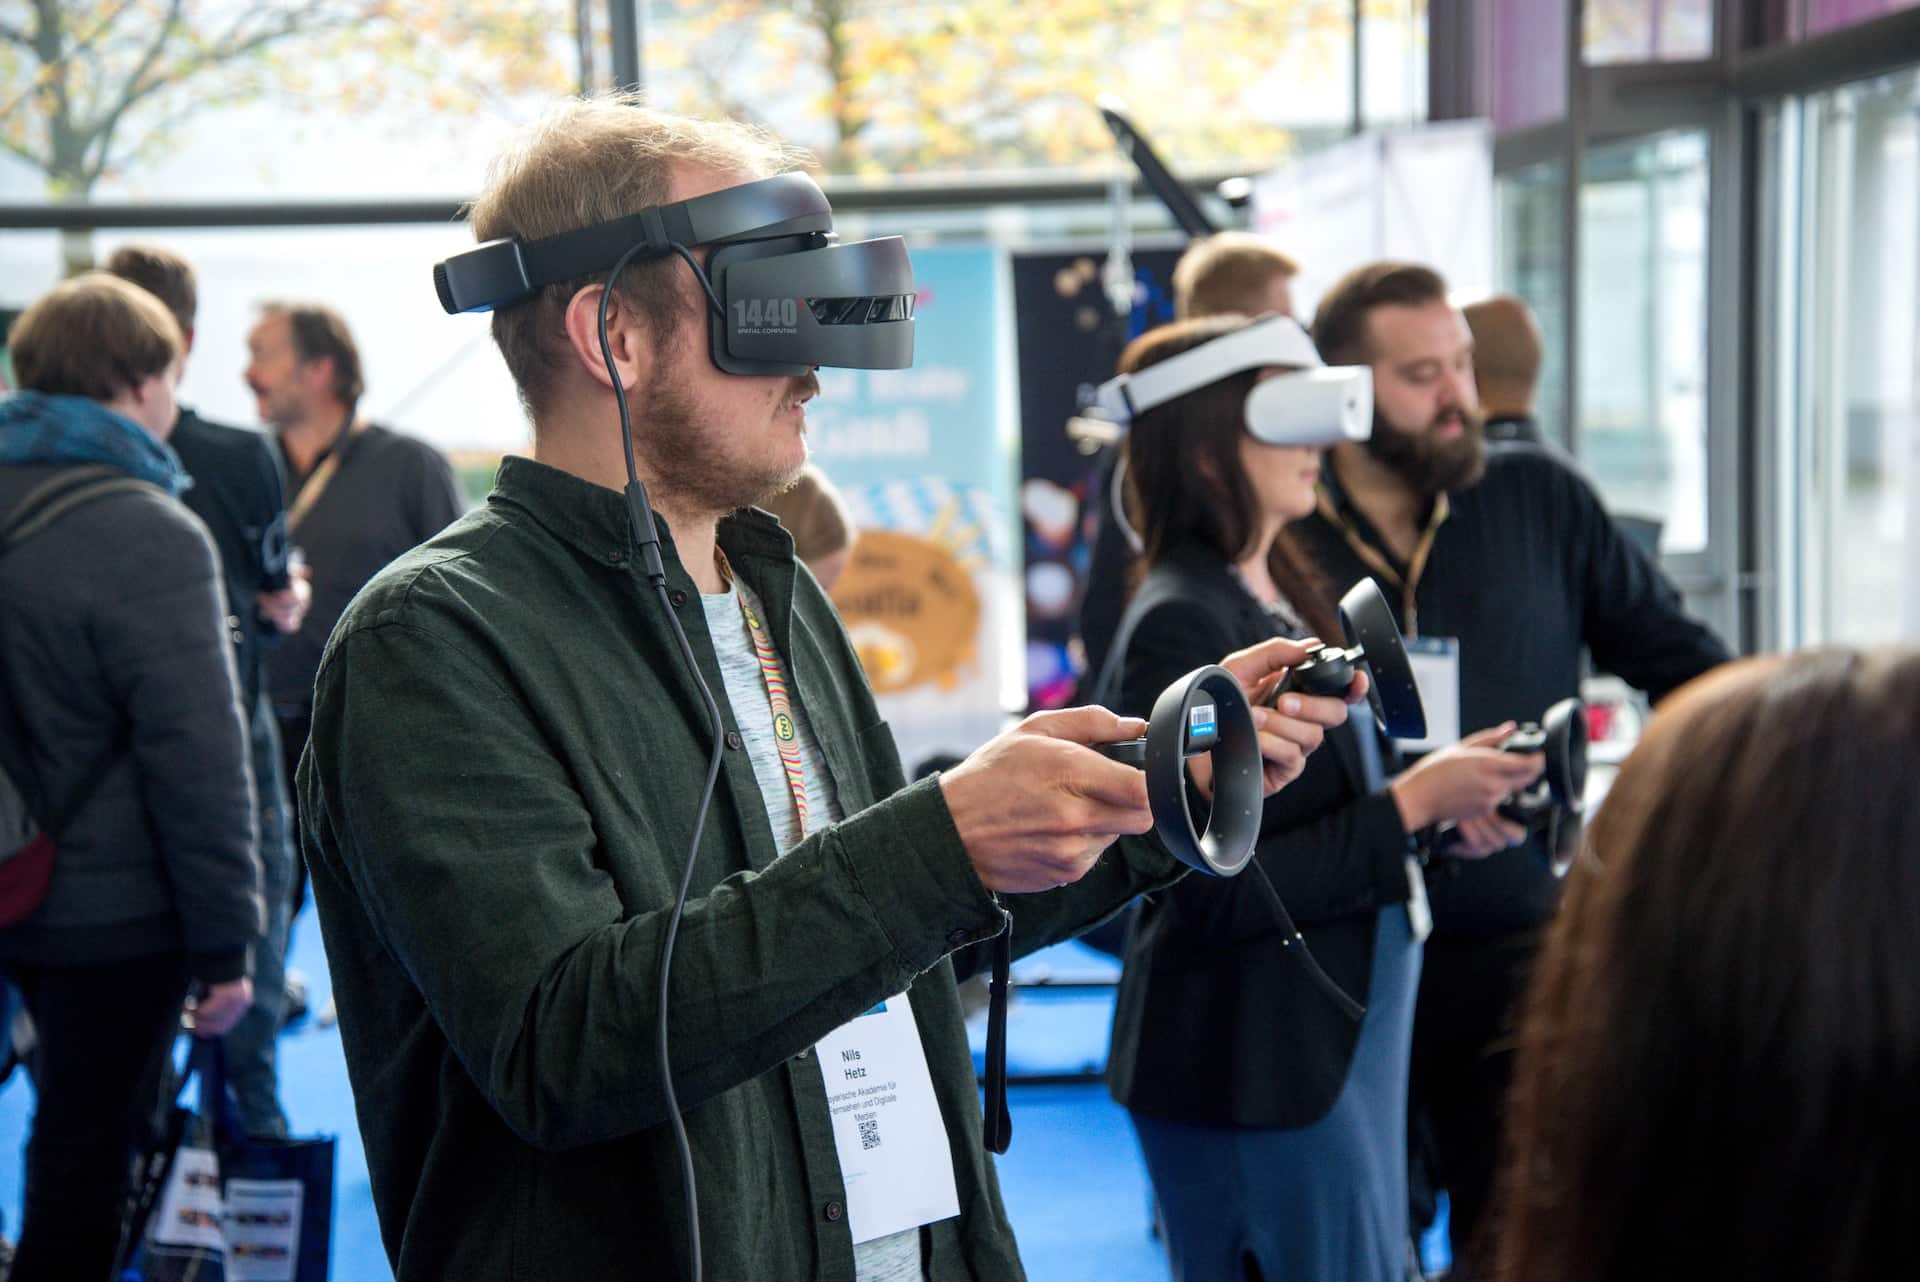 Image Title: VR Expo Demo Image Description: Attendee experiencing virtual reality at an event technology expo Alt Text: Immersive Event Technologies Source: https://unsplash.com/photos/person-wearing-vr-smartphone-headset-inside-room-NN9HQkDgguc